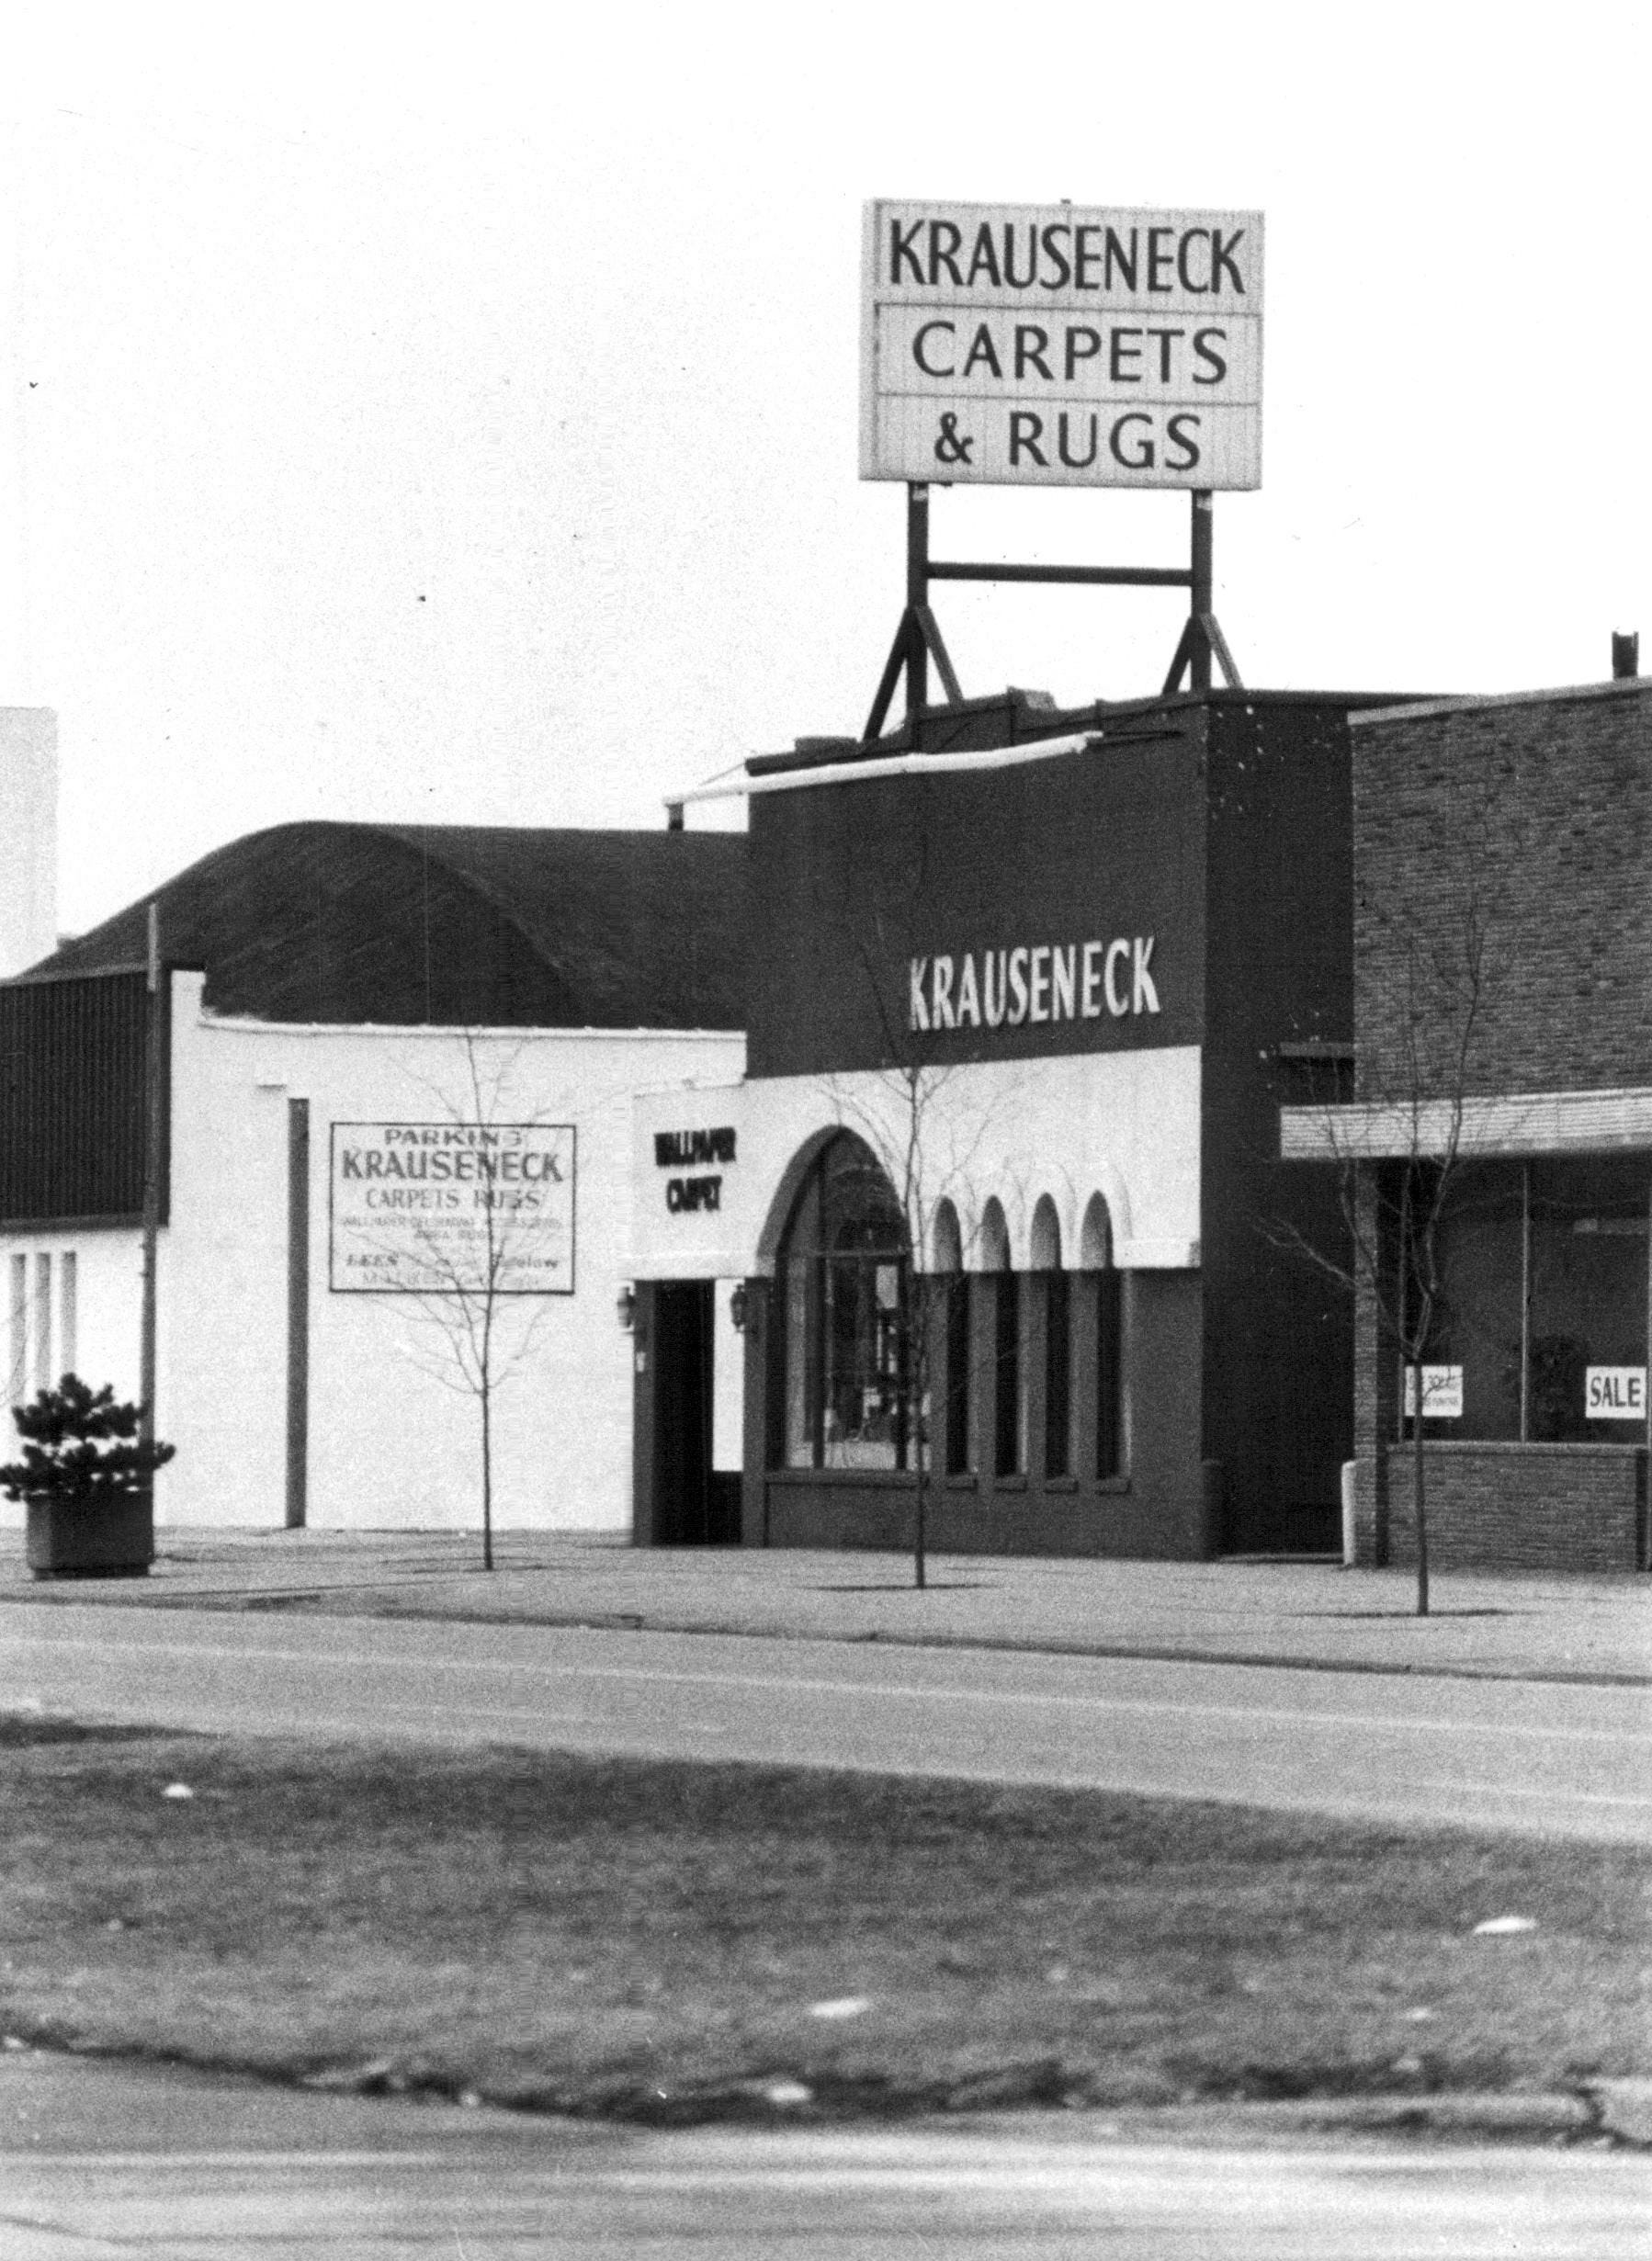 This file photo shows Krauseneck Carpet & Rugs in Mount Clemens, Michigan. James Krauseneck went to work there after his wife's death.